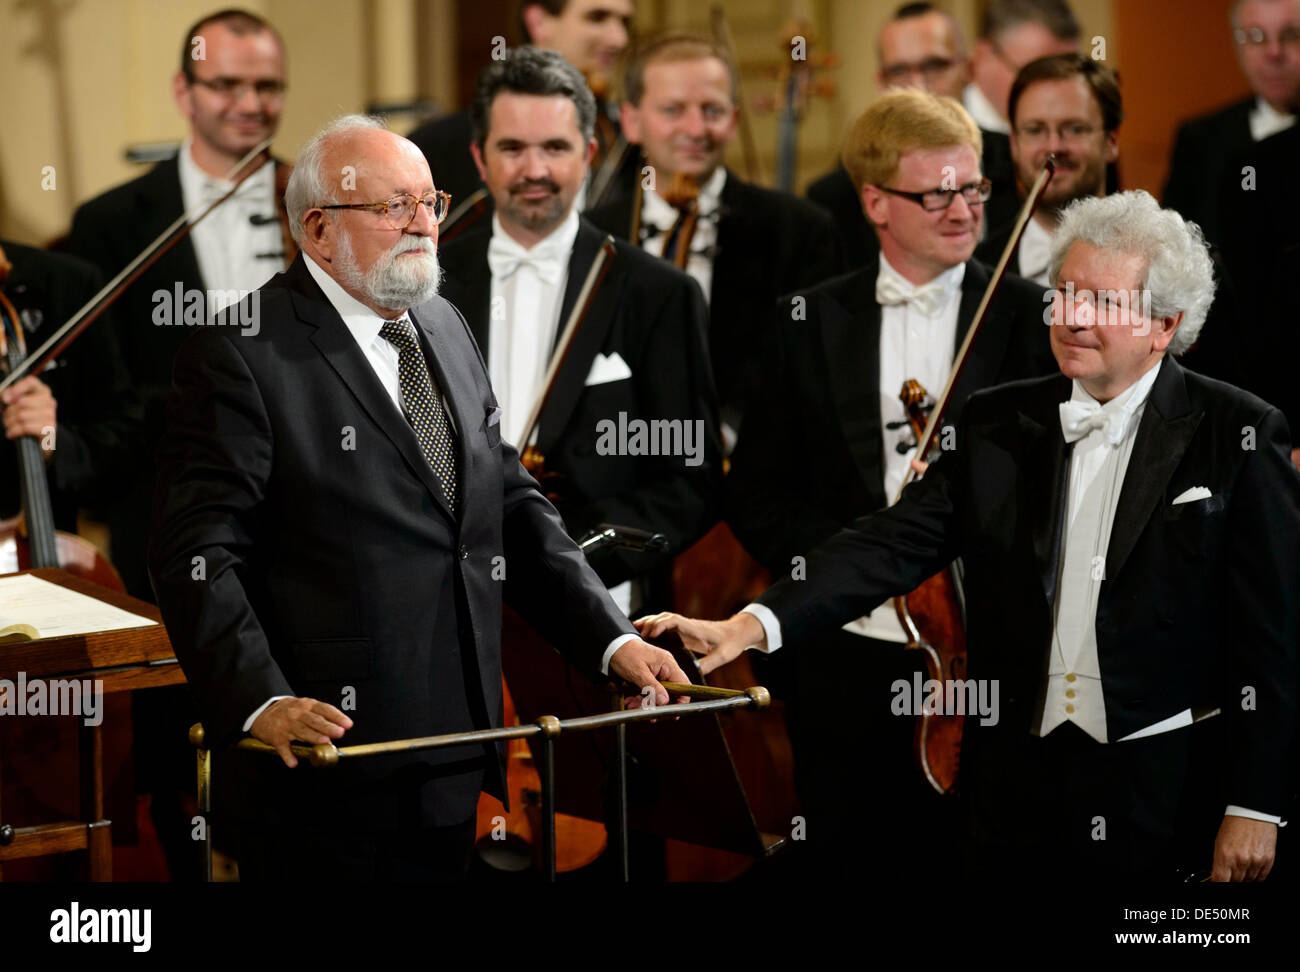 Krzysztof Penderecki (left) thanks to the audience for ovation after performing Agadia from the 3rd symphony which Czech Philharmony played under the leadership of Jiri Belohlavek (right) during the International Music Festival Dvorakova Praha in Prague, Czech Republic on September 10, 2013. (CTK Photo/Michal Kamaryt) Stock Photo